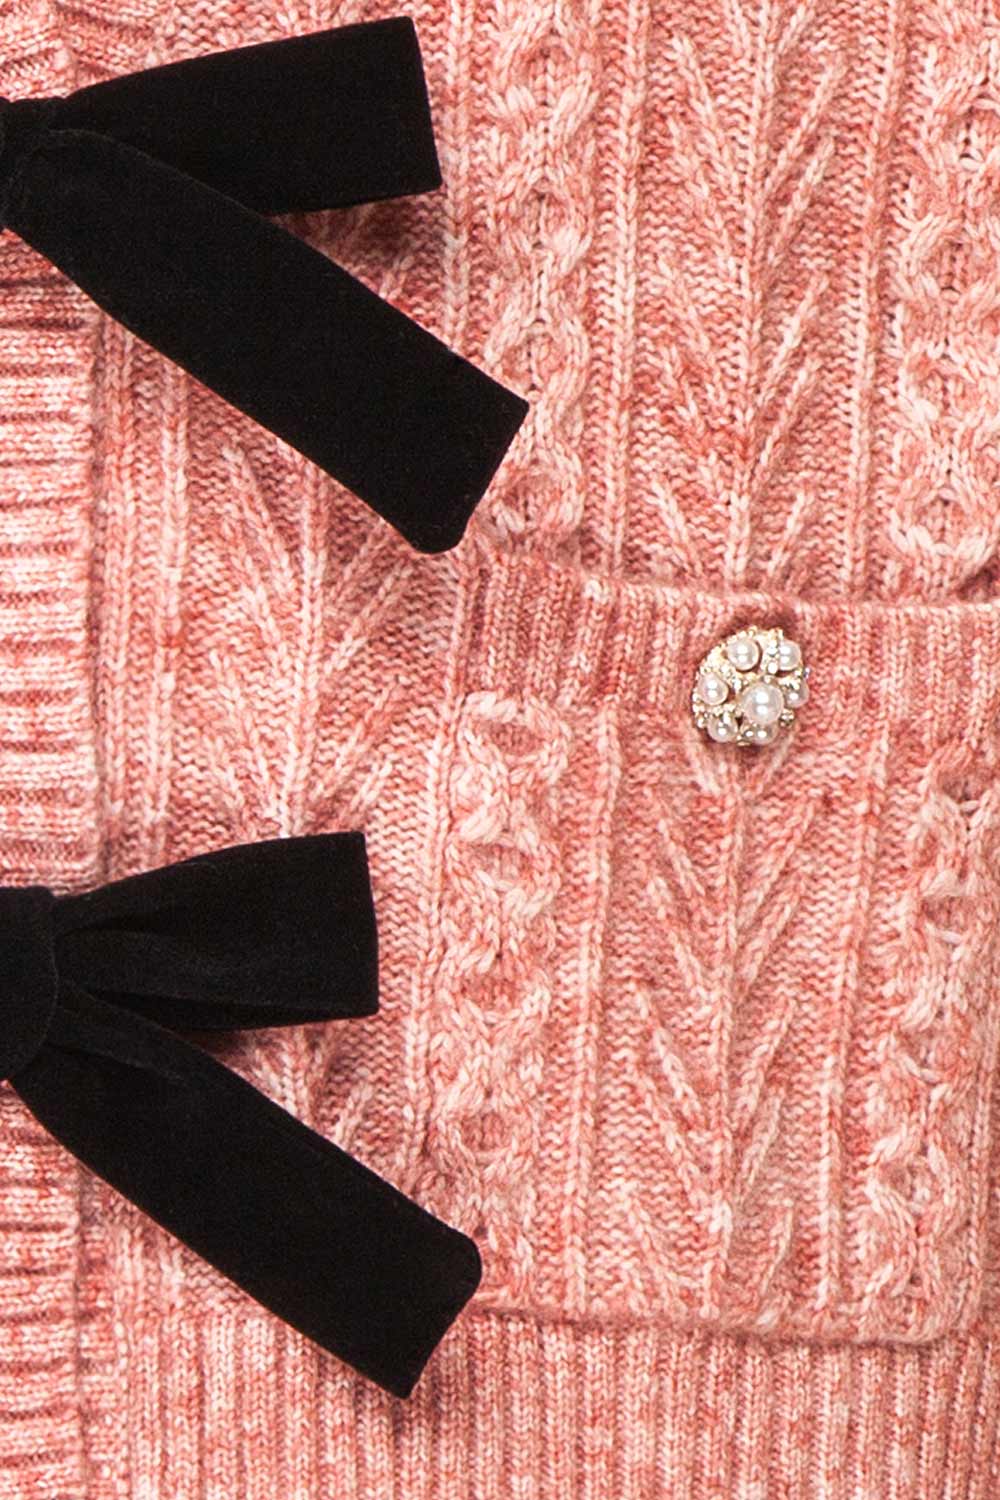 Loukia Pink Cropped Knit Cardigan w/ Bow Detail | Boutique 1861 fabric 